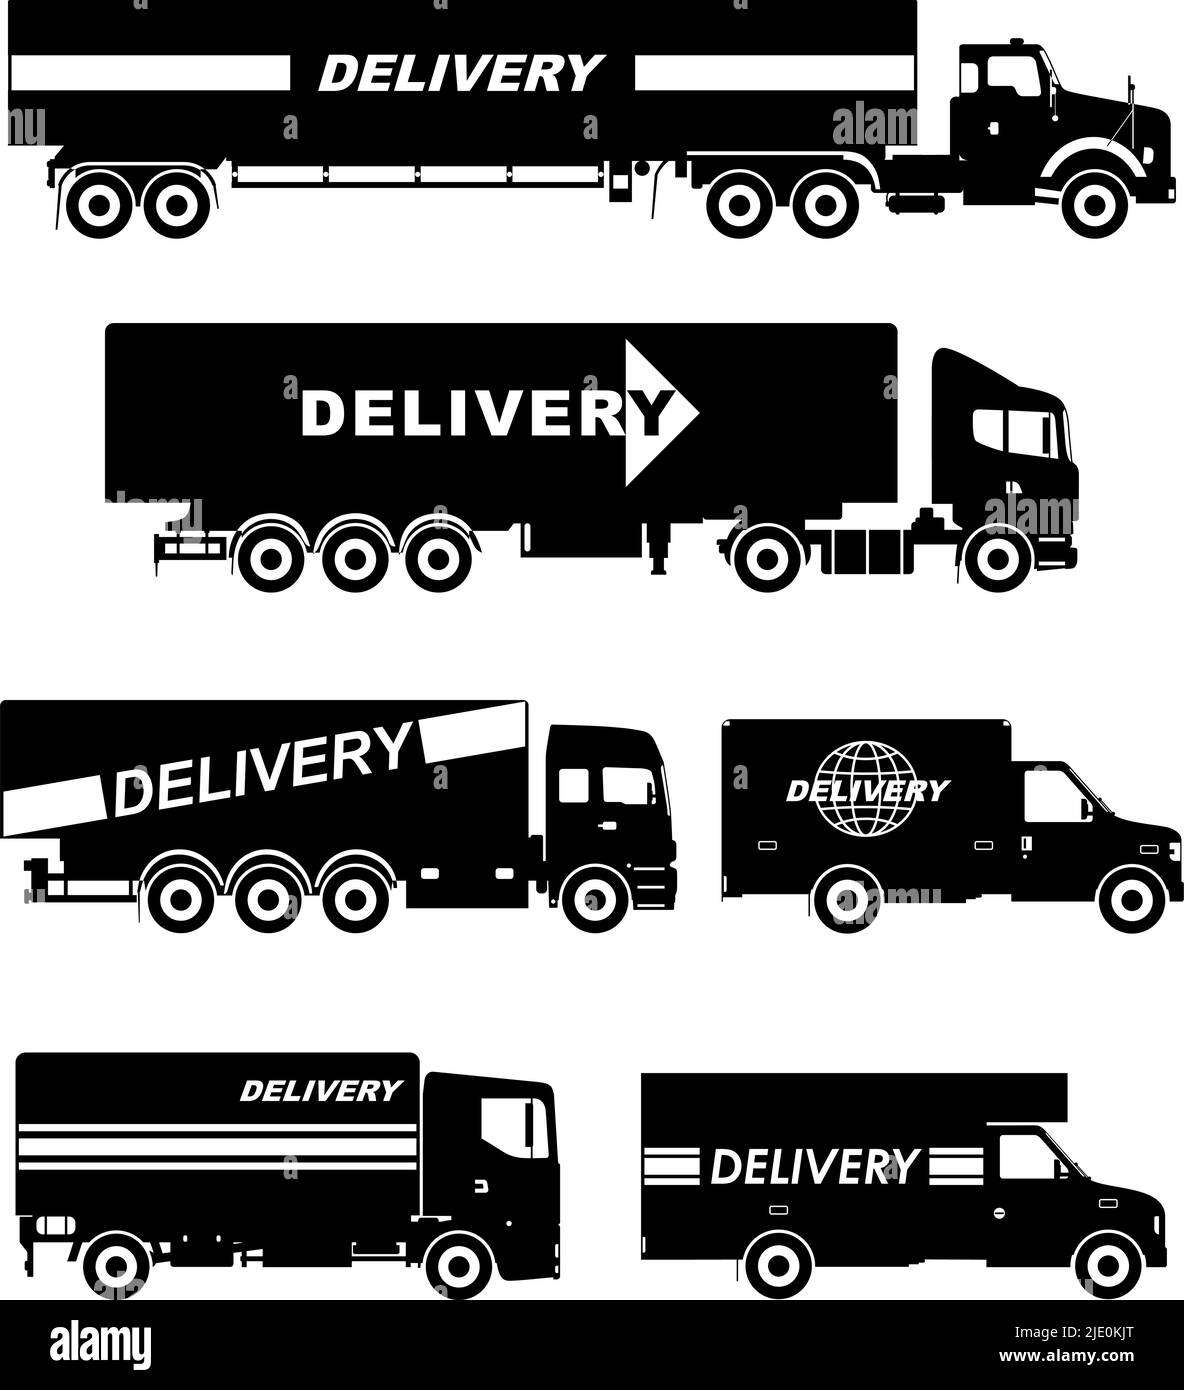 Silhouette illustration of delivery trucks on white background. Stock Vector